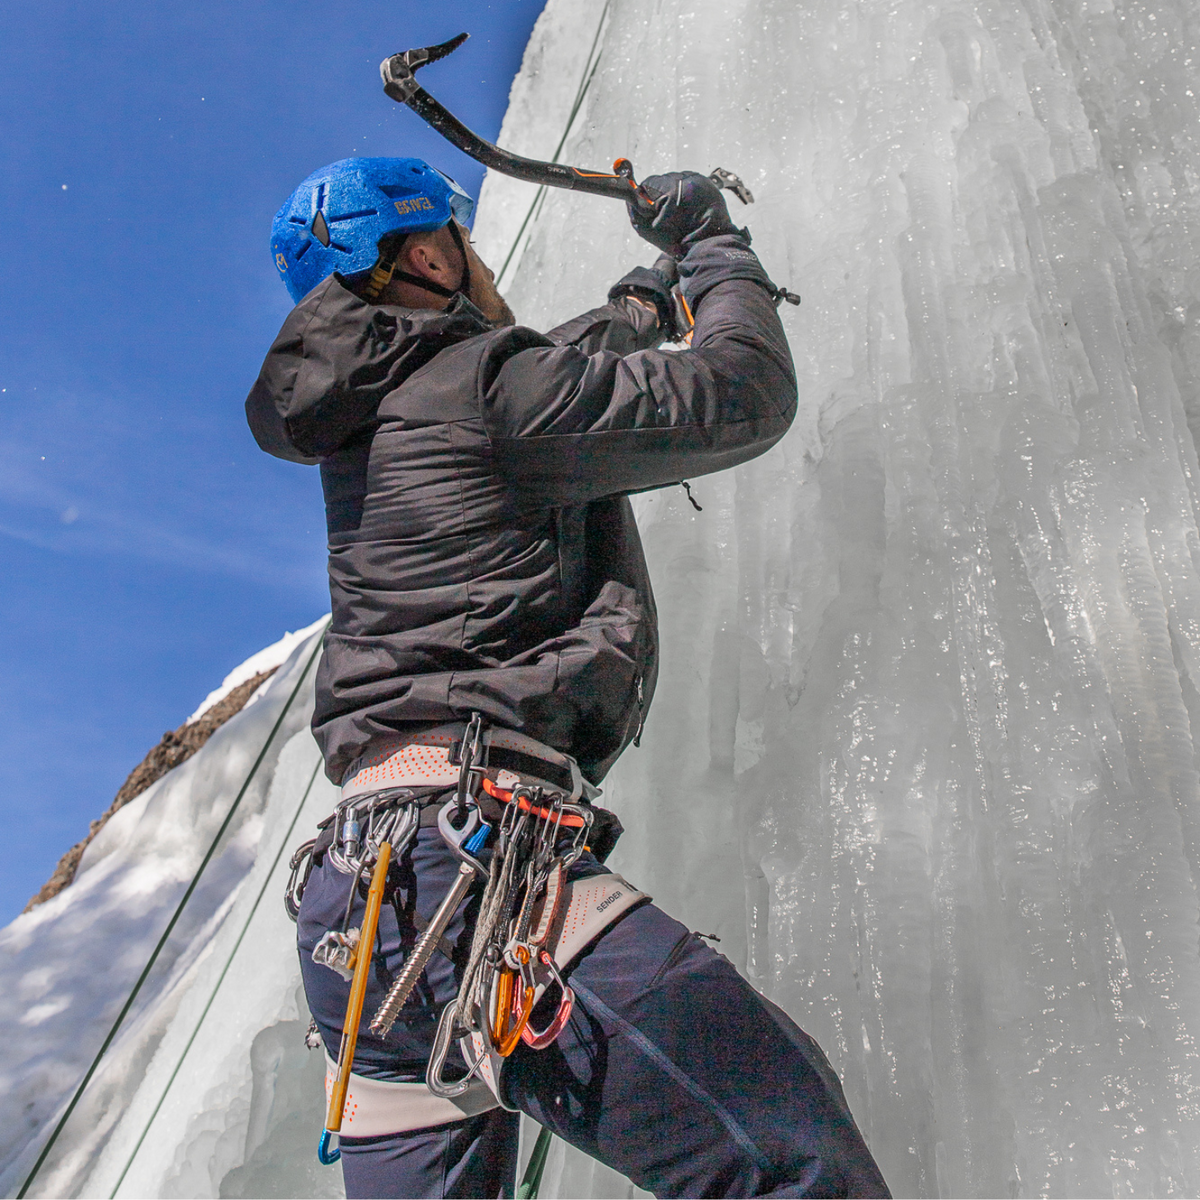 A photo looking from below a male ice climber wielding an ice pick. He is wearing a climbing harness belt with various clips, a pair of navy snowpants, black gloves, a bright blue helmet, and an Alpacas of Montana warm top layer insulated cozy comfortable thermal winter outerwear heavyweight alpaca wool lined graphite gray black granite peak expedition parka for skiing, snowboarding, ice fishing, hunting, camping, arctic, travel, outdoors